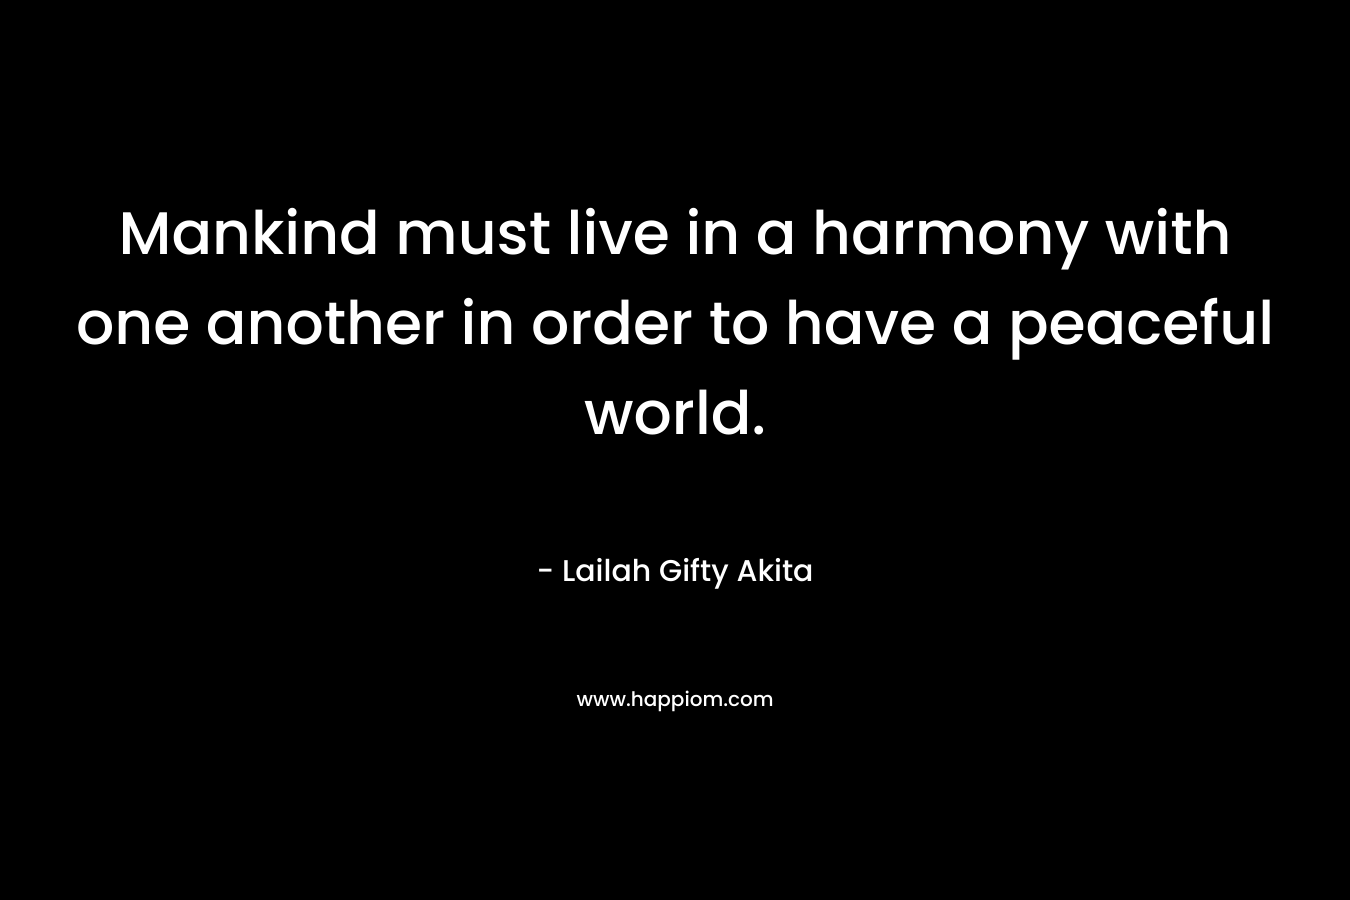 Mankind must live in a harmony with one another in order to have a peaceful world.